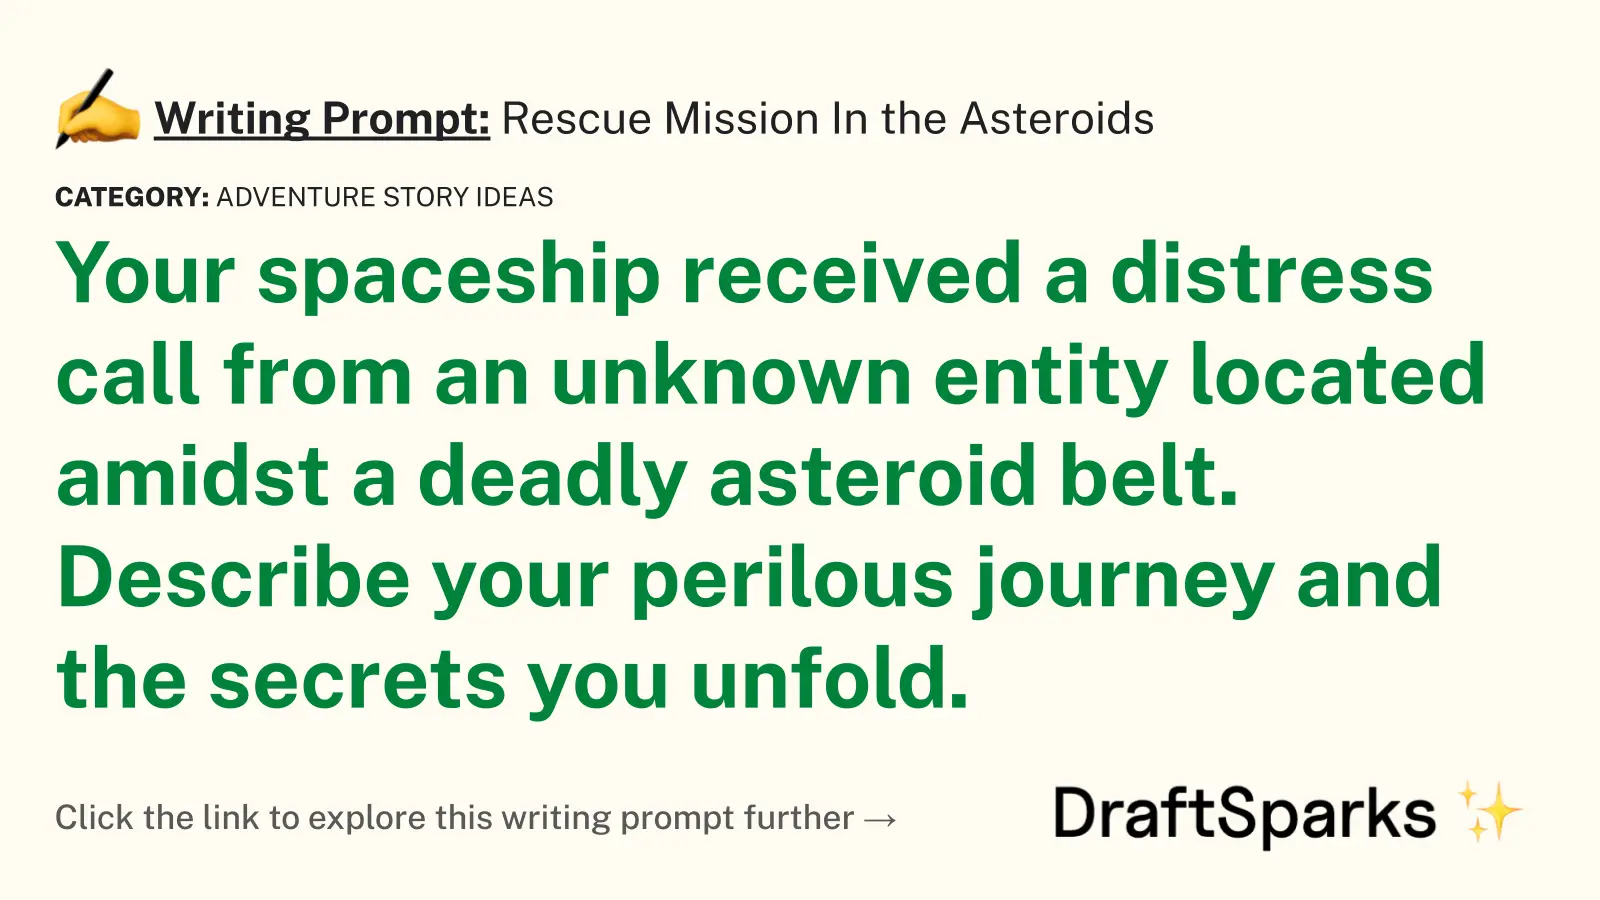 Rescue Mission In the Asteroids